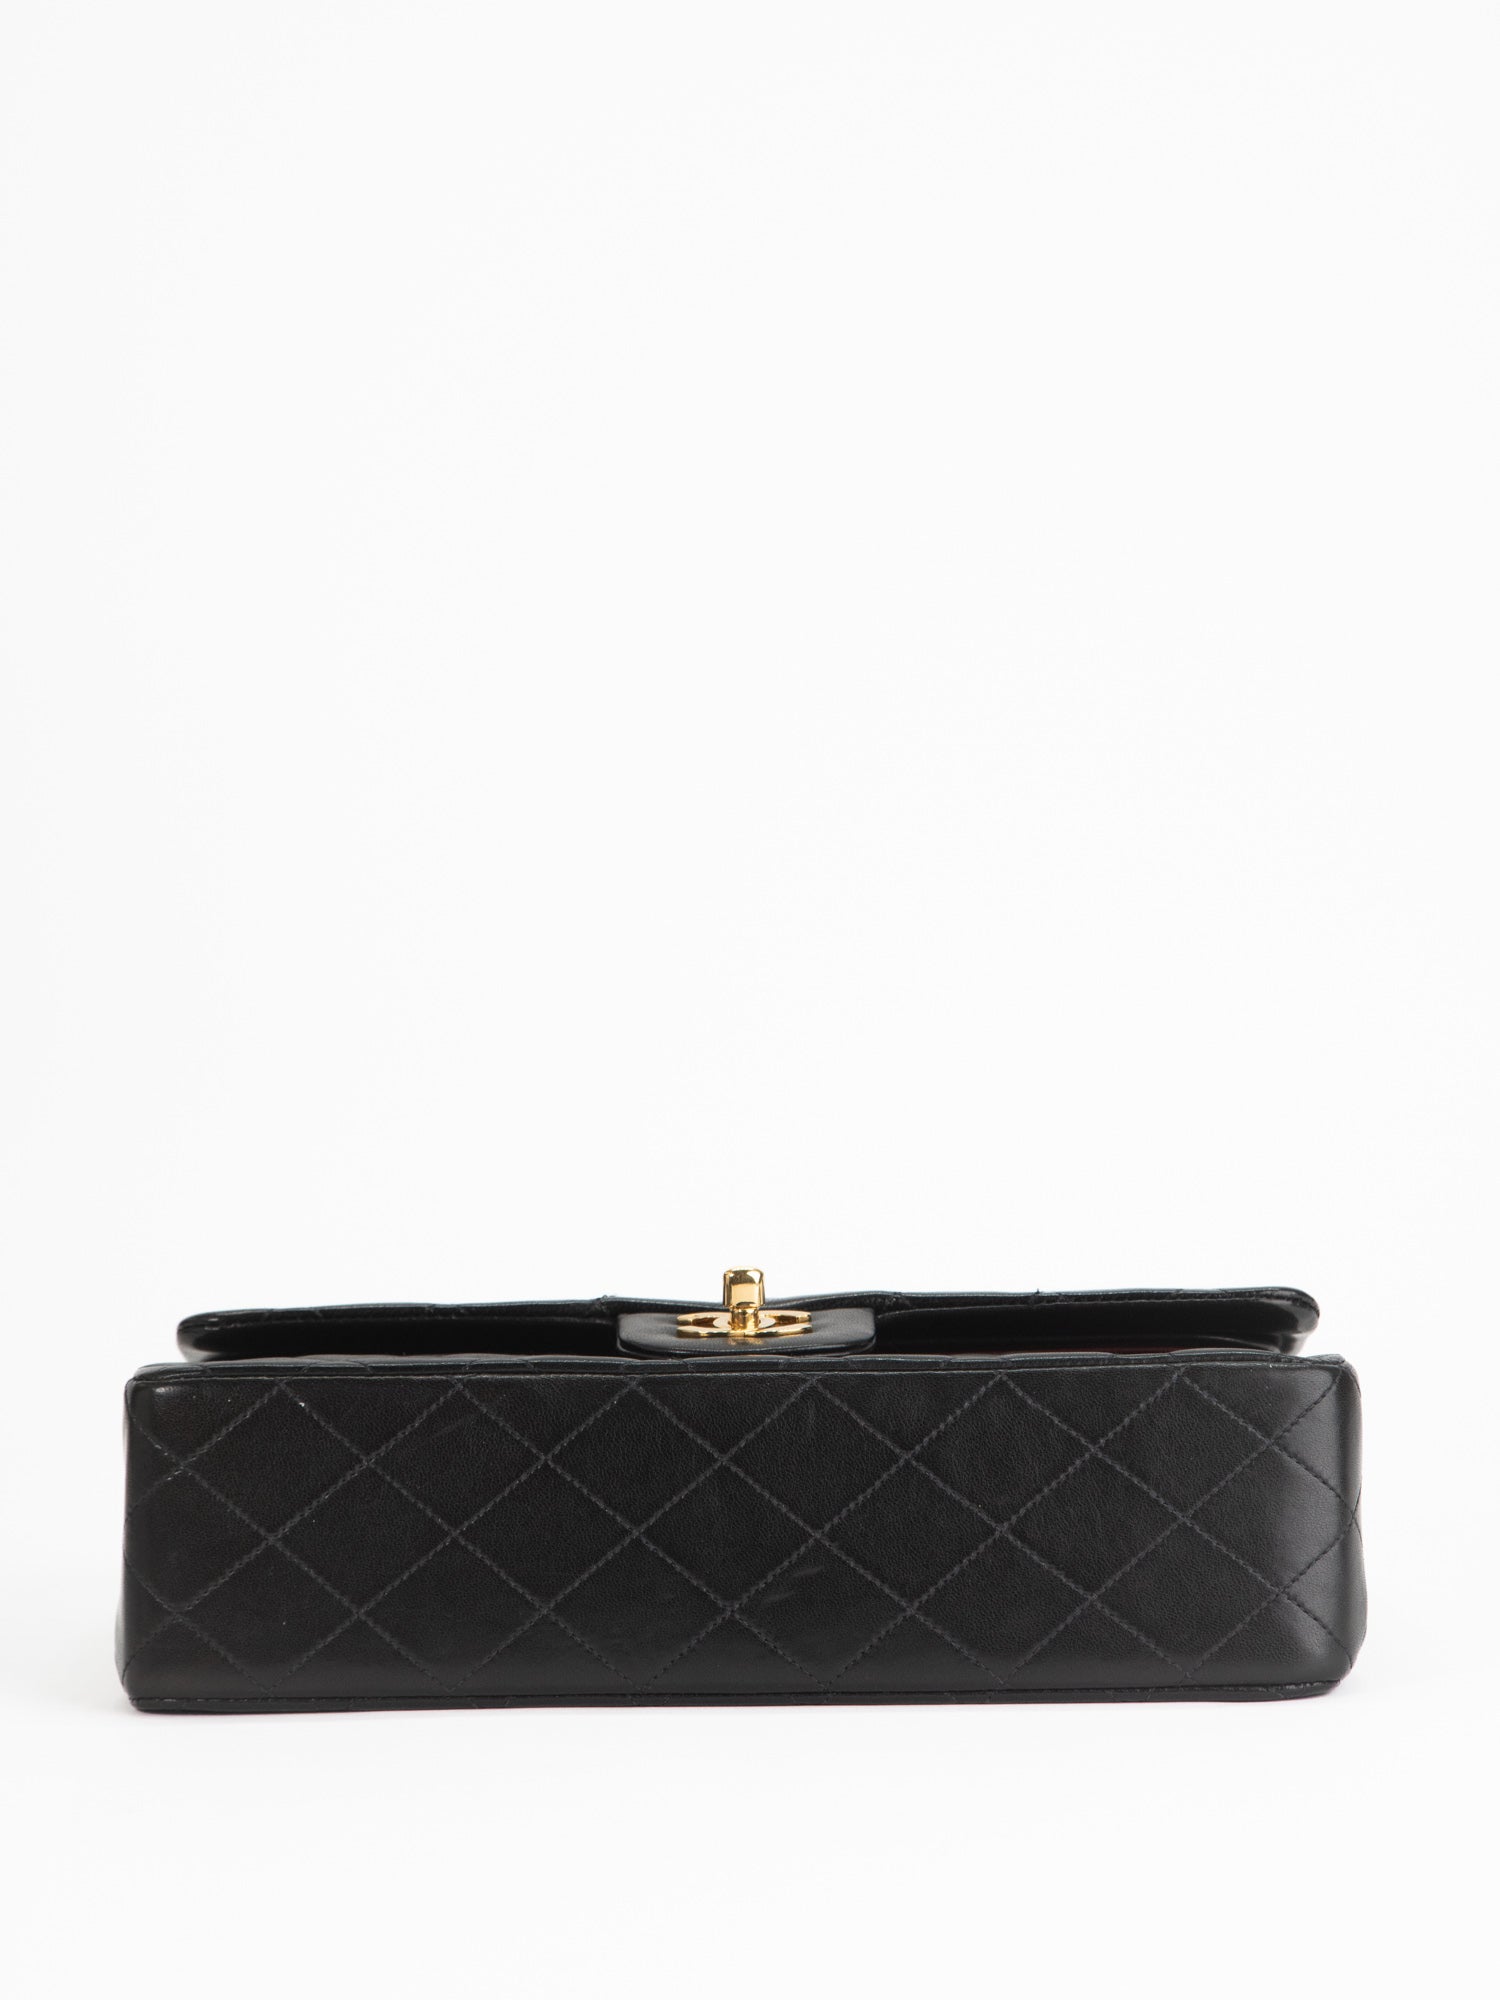 Chanel Black Quilted Lambskin Square Mini Classic Flap Bag